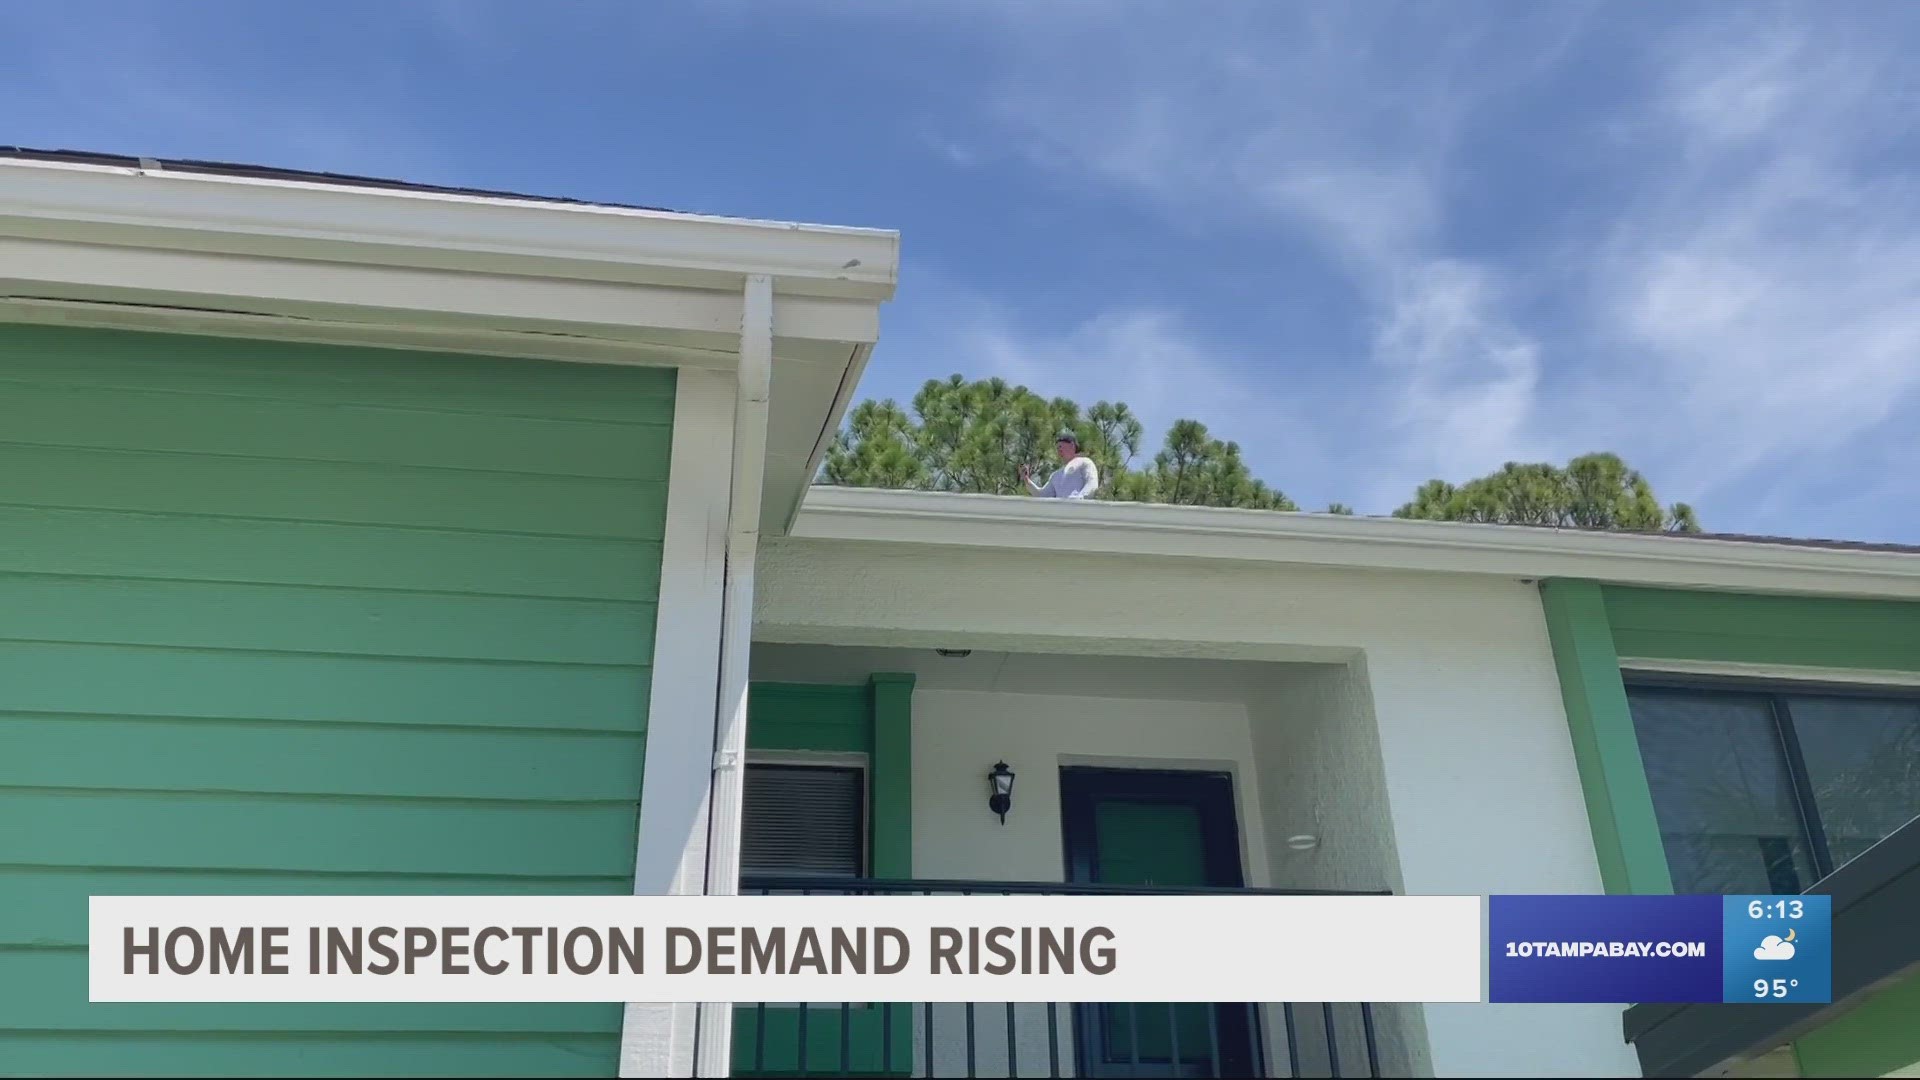 Home inspectors are staying busy as those dropped from coverage look to get new policies.